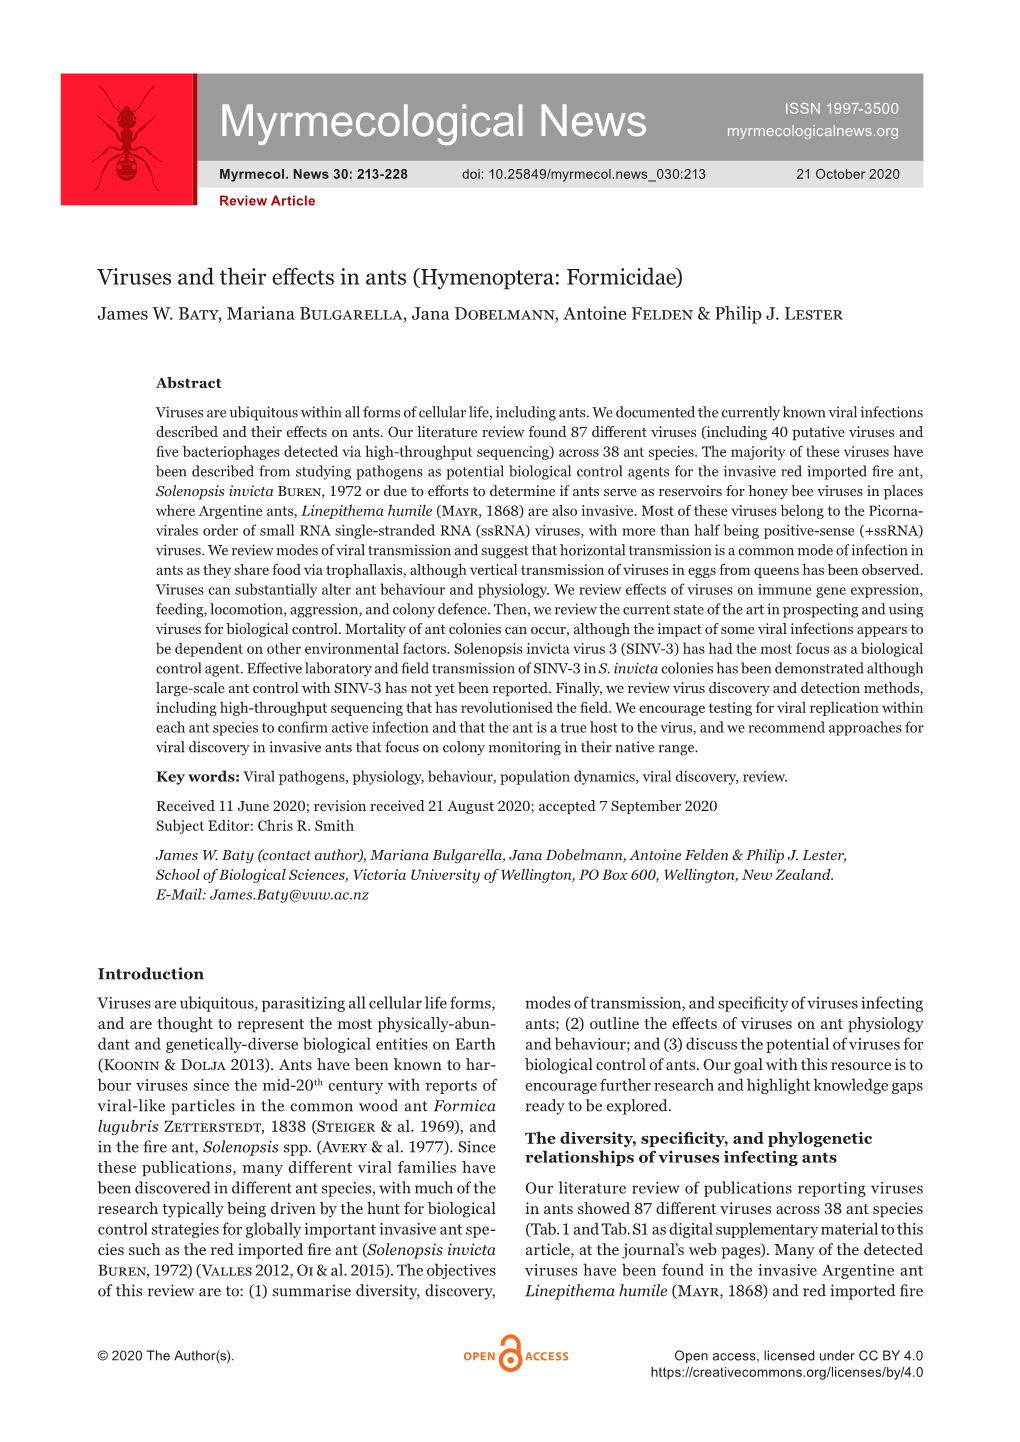 Viruses and Their Effects in Ants (Hymenoptera: Formicidae) James W